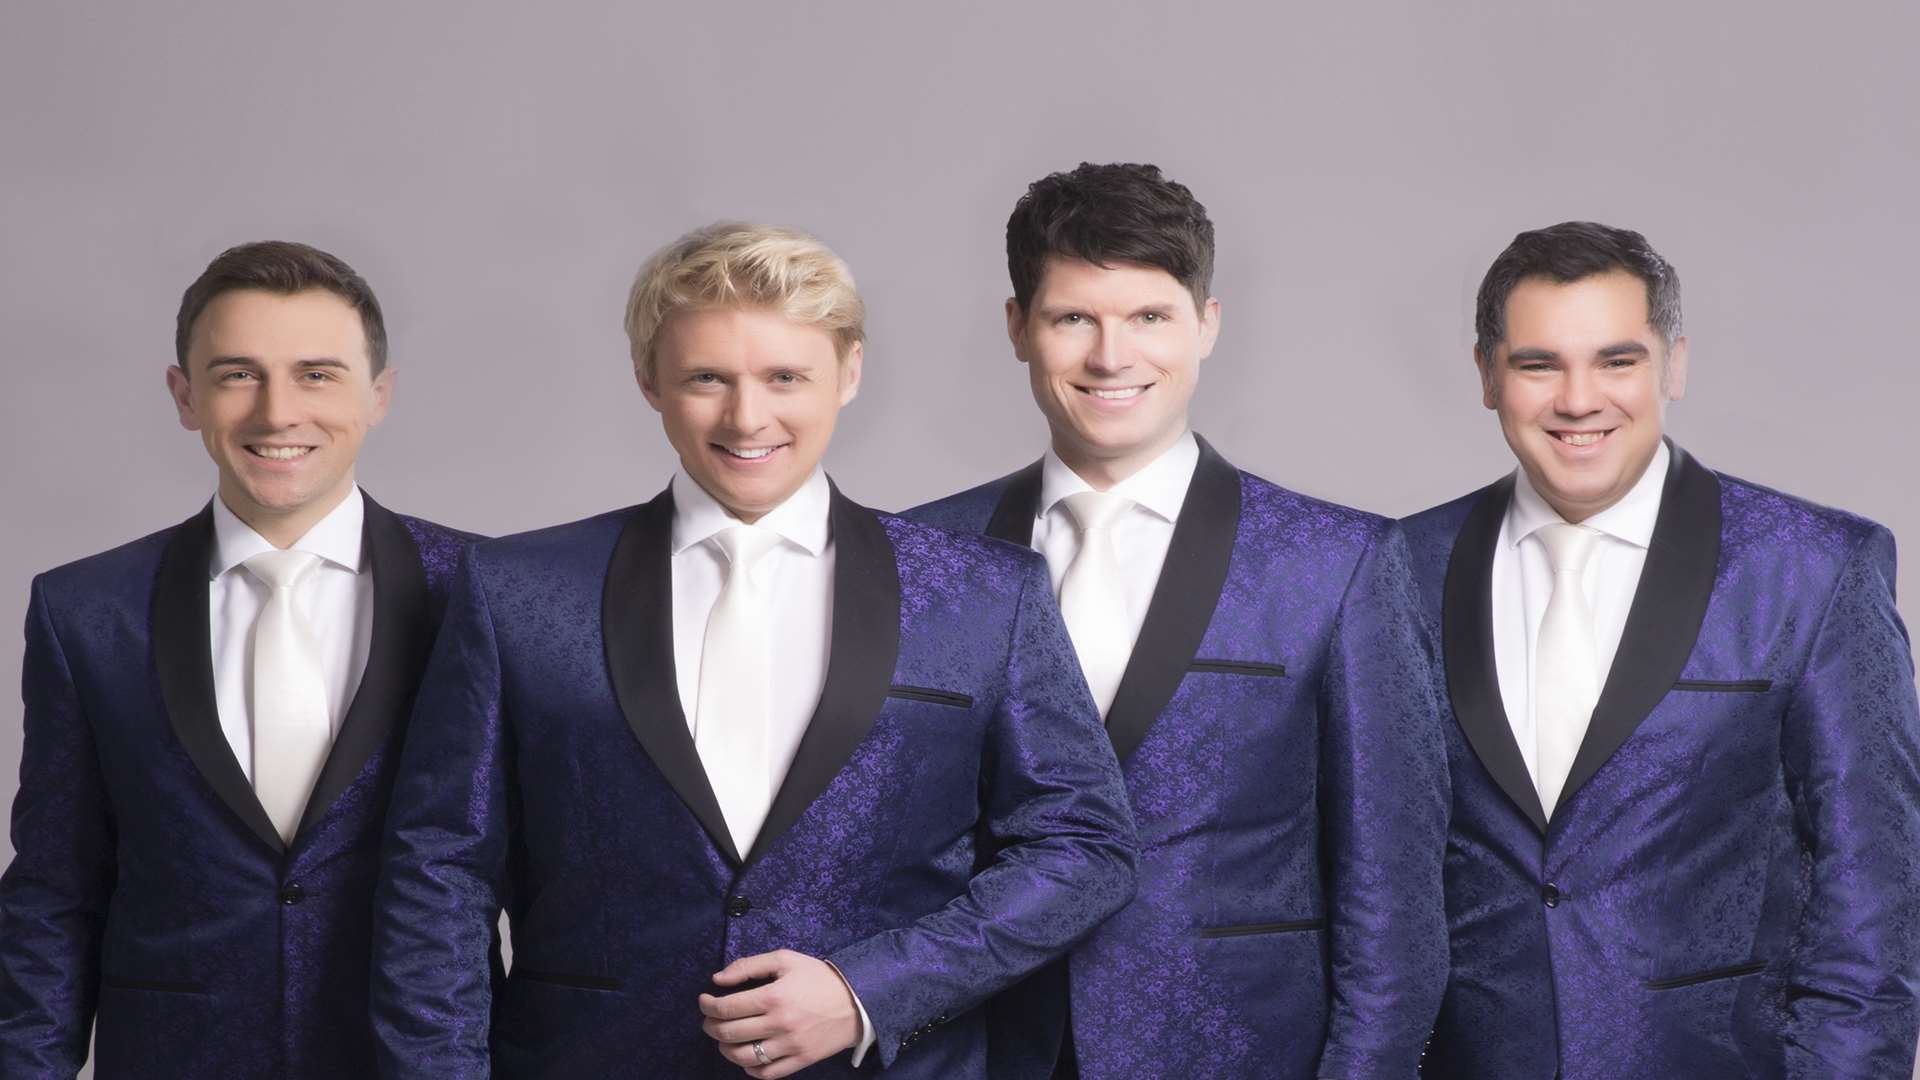 G4 - Nick Ashby, Jonathan Ansell, Mike Christie and Ben Thapa - will be in Tunbridge Wells